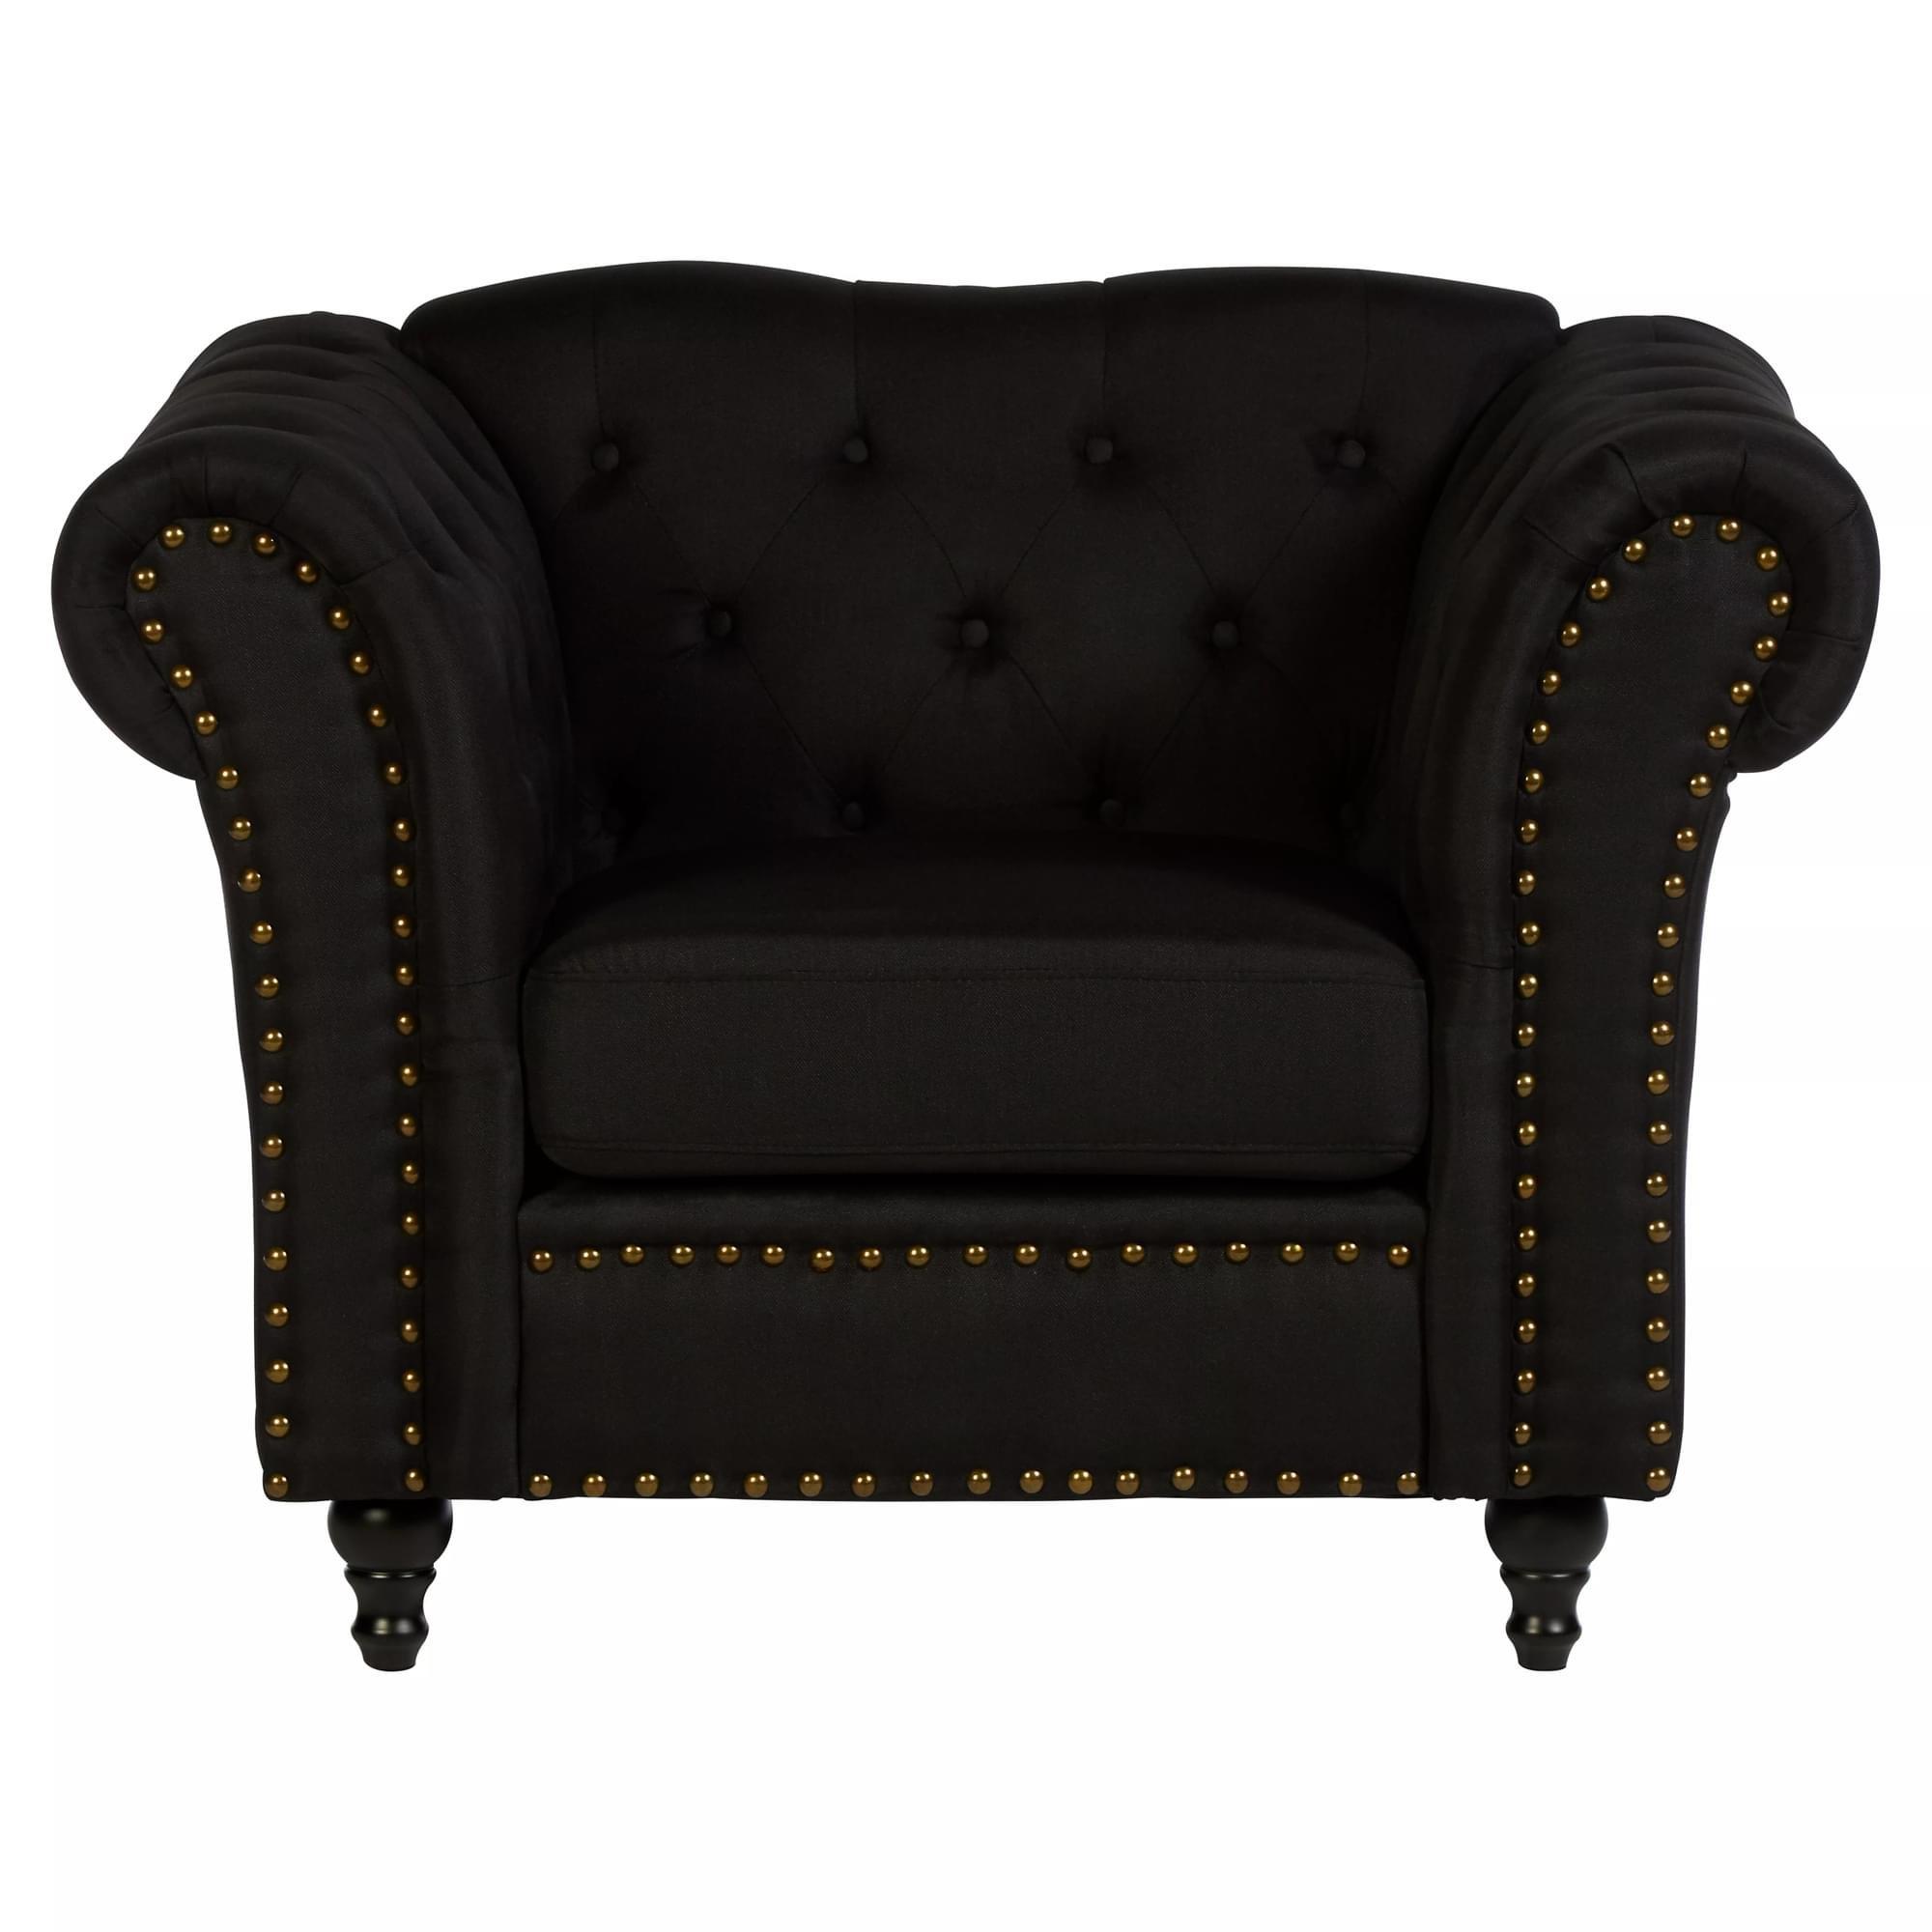 Interiors by Premier Fable Chesterfield Chair